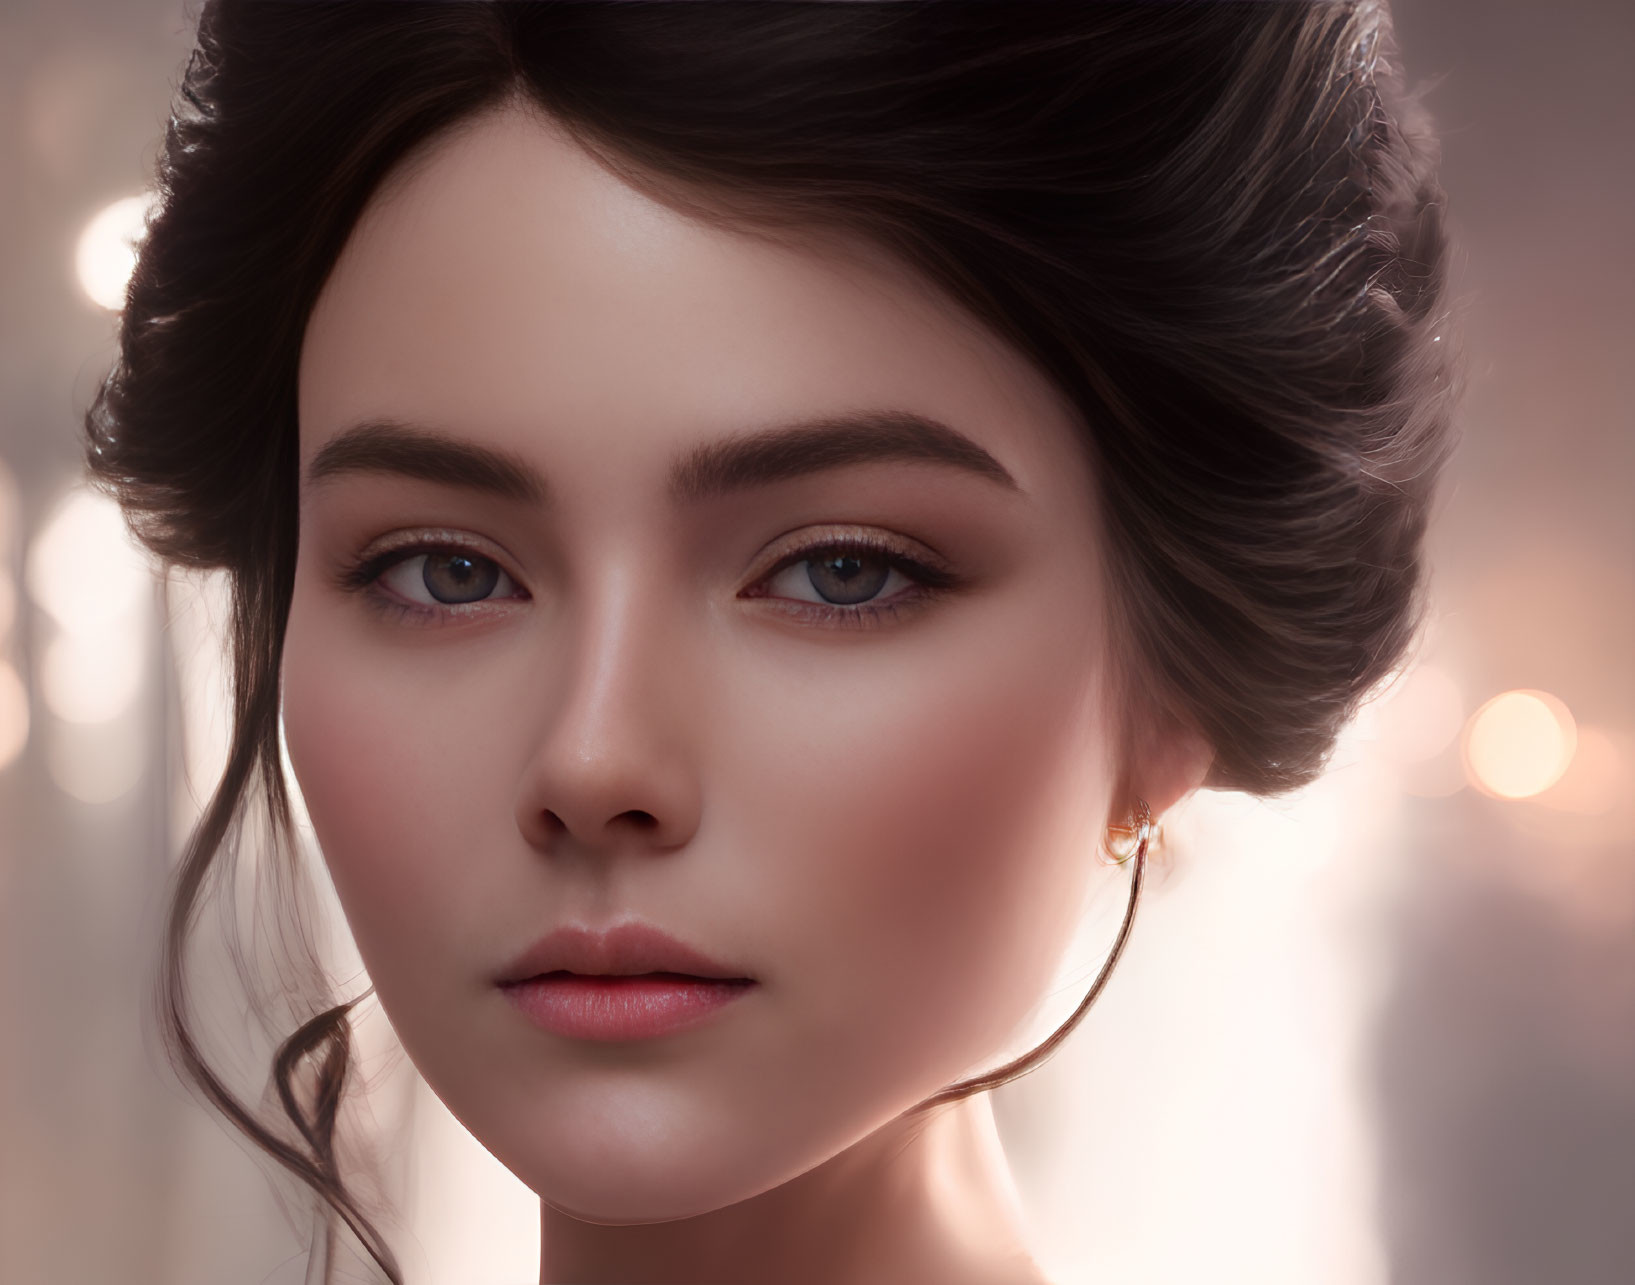 Dark-haired woman in updo with hoop earrings against soft-lit backdrop